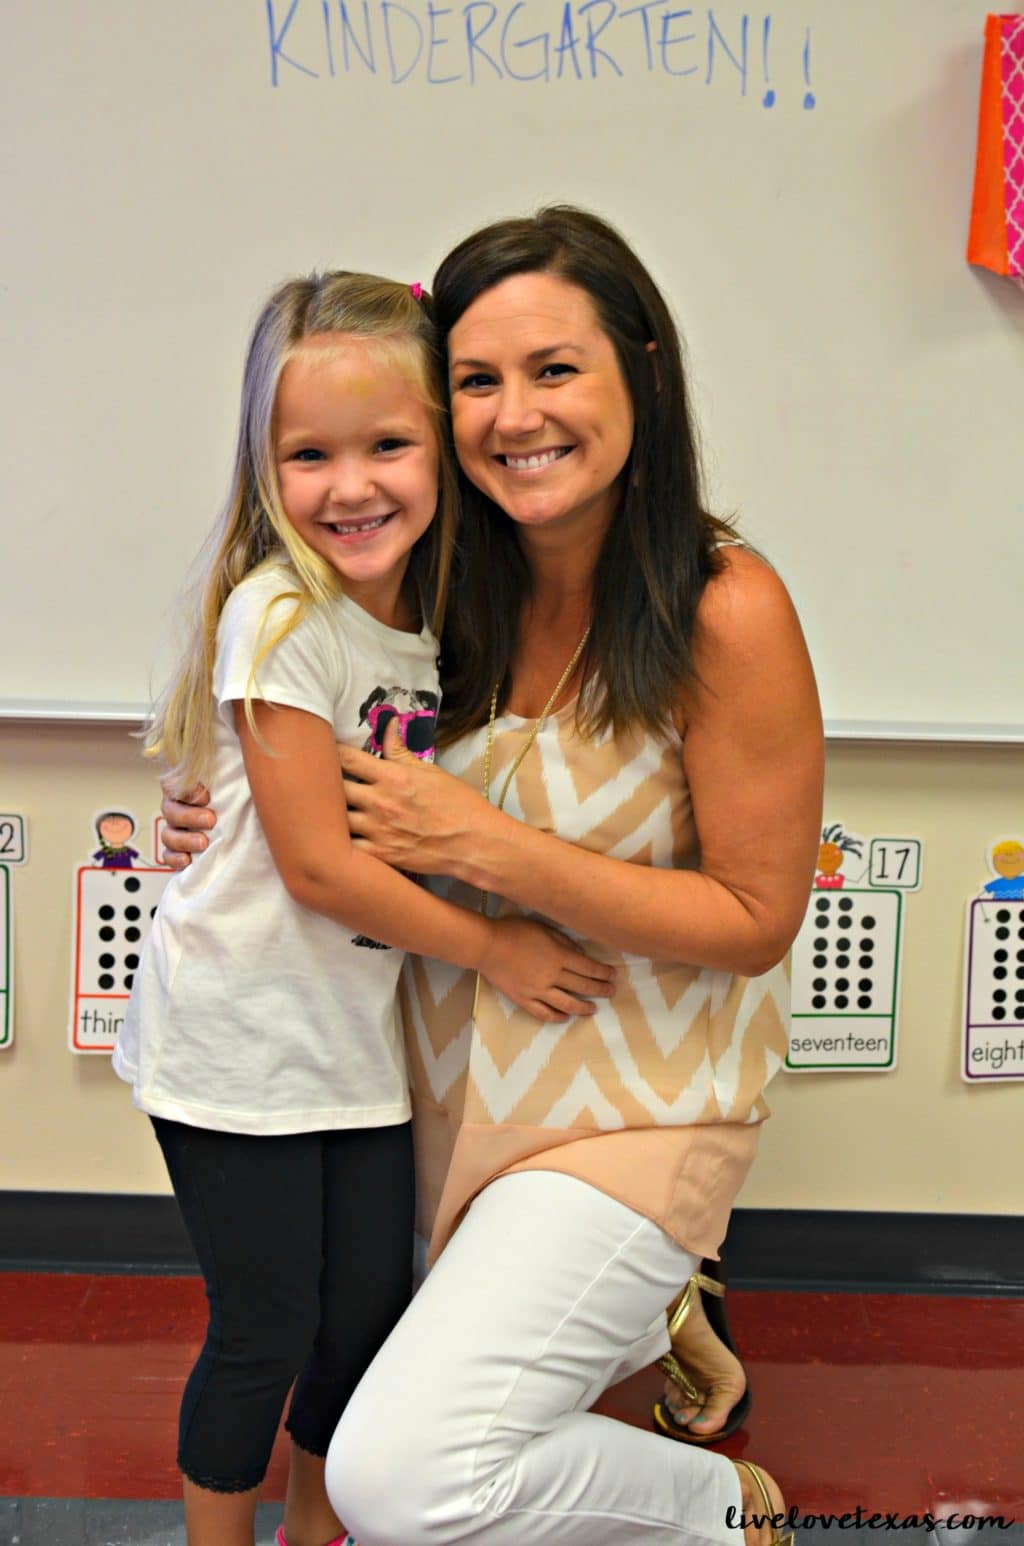 Summer is almost over. Stop wondering how to get my child ready for kindergarten and learn everything you need to know before sending your little one off!